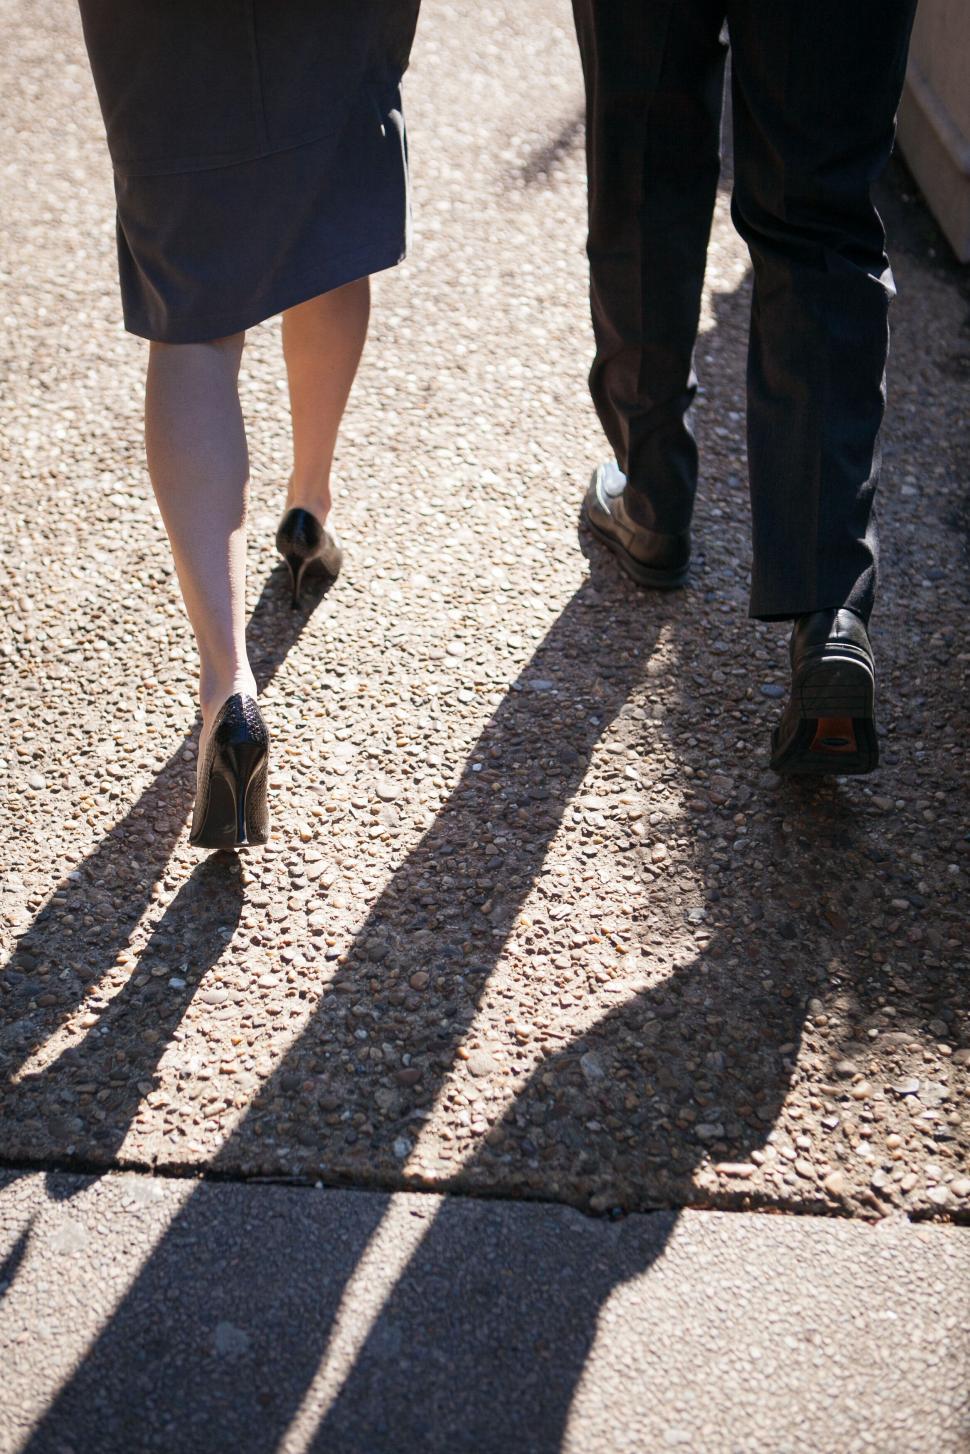 Free Image of Walking couple s shadow on a cobblestone path 